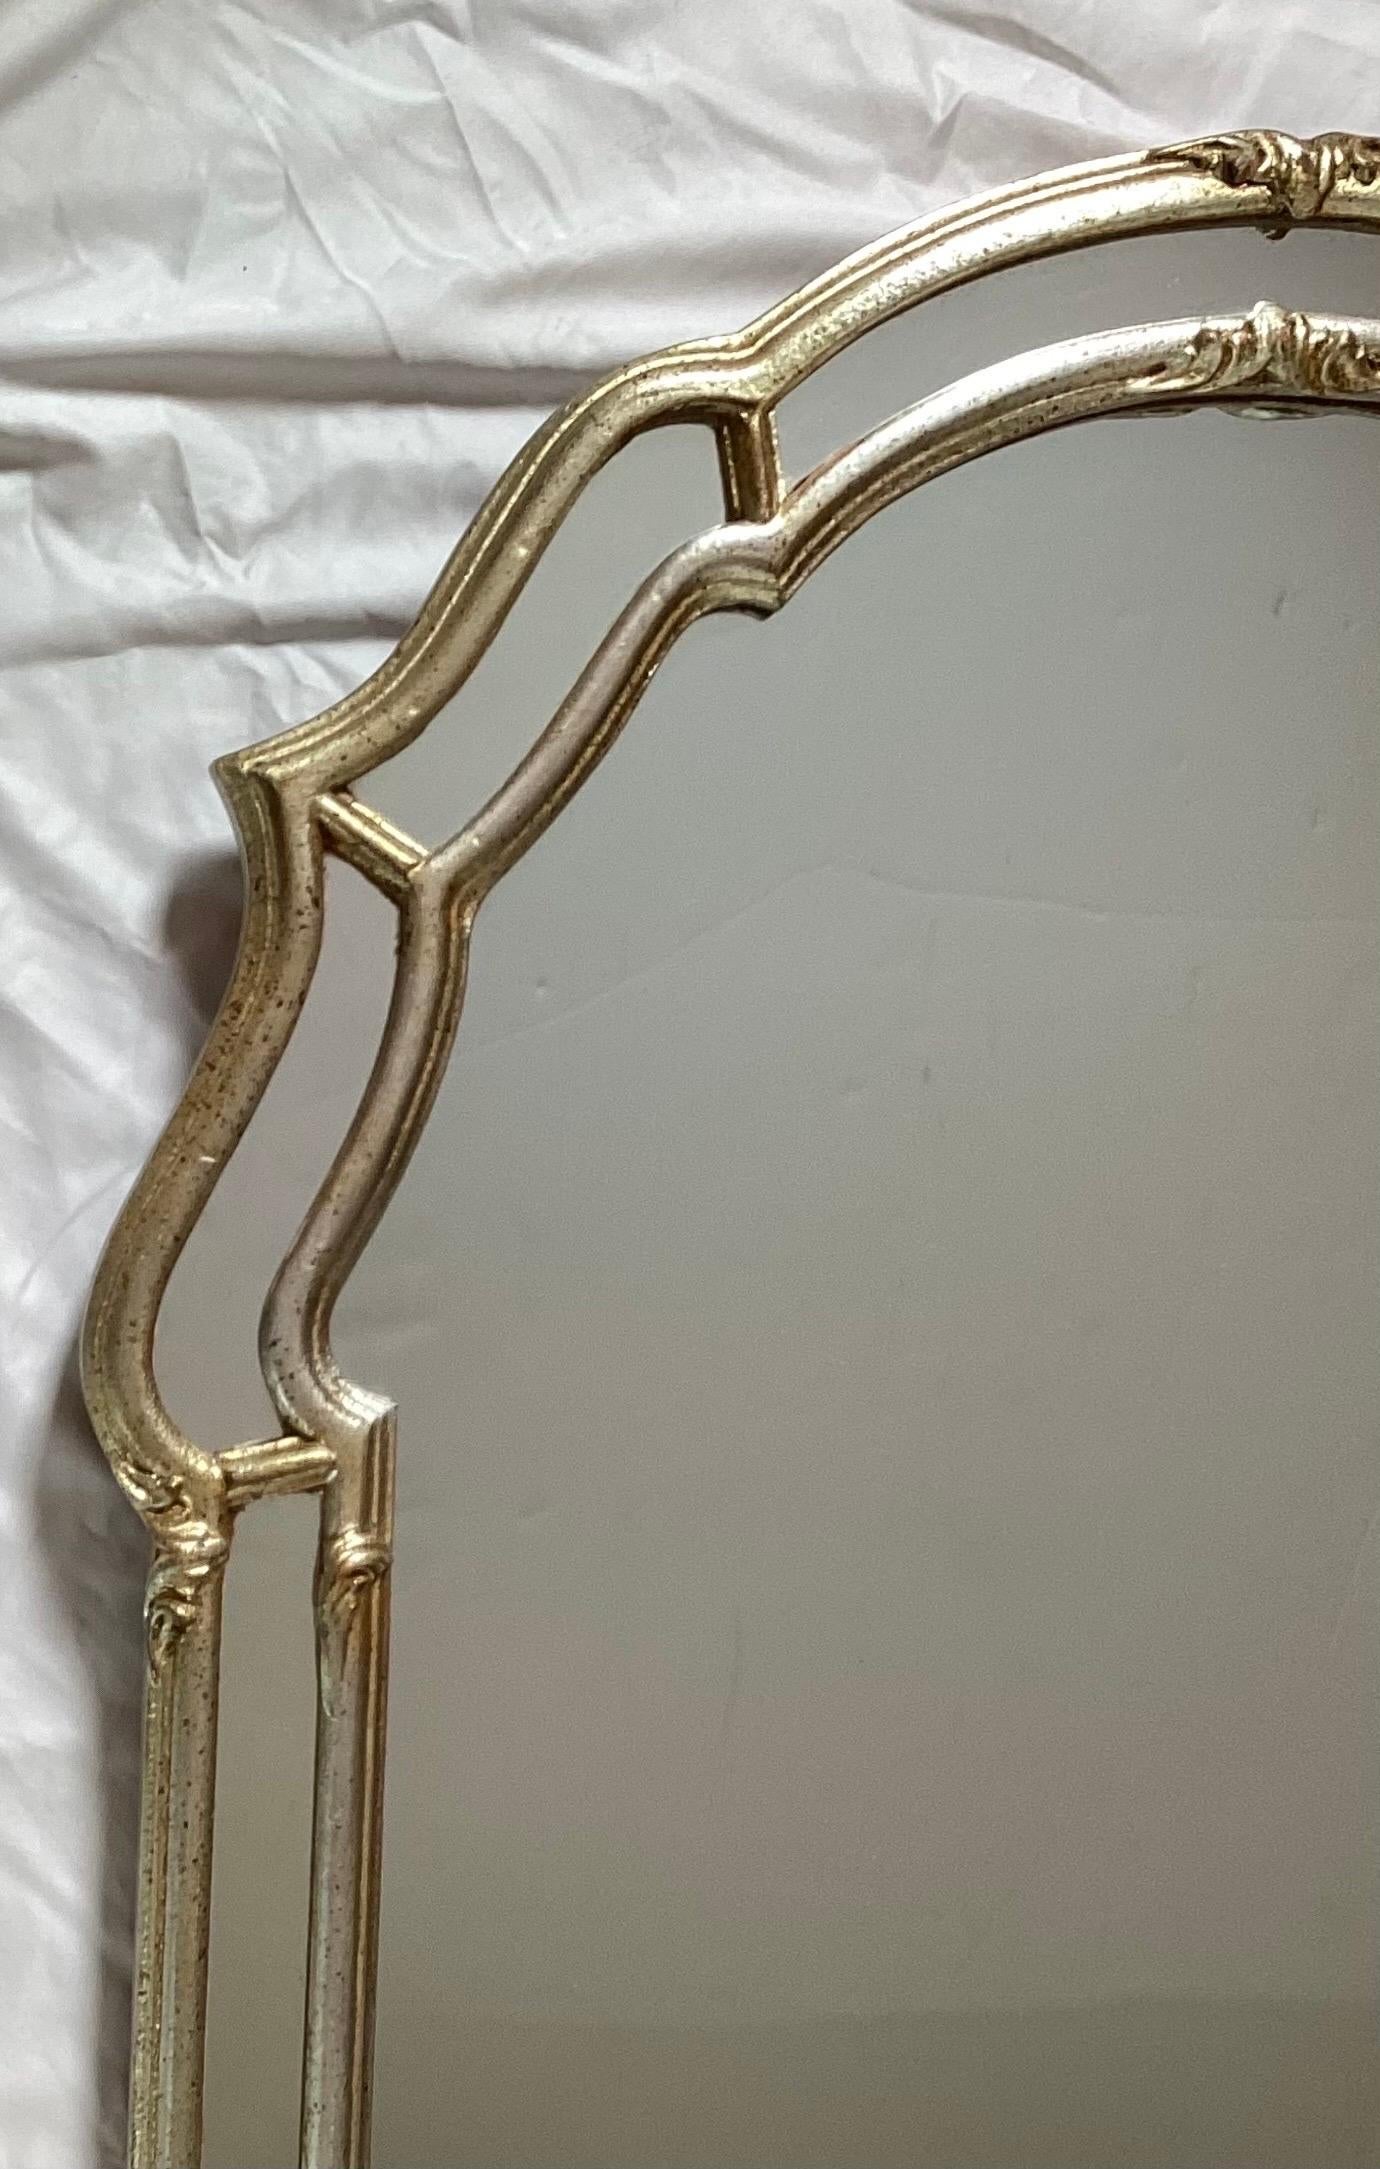 Nice Mid-Century Silver Gilt Hollywood Regency Style Mirror
In very good original condition, Ready to install